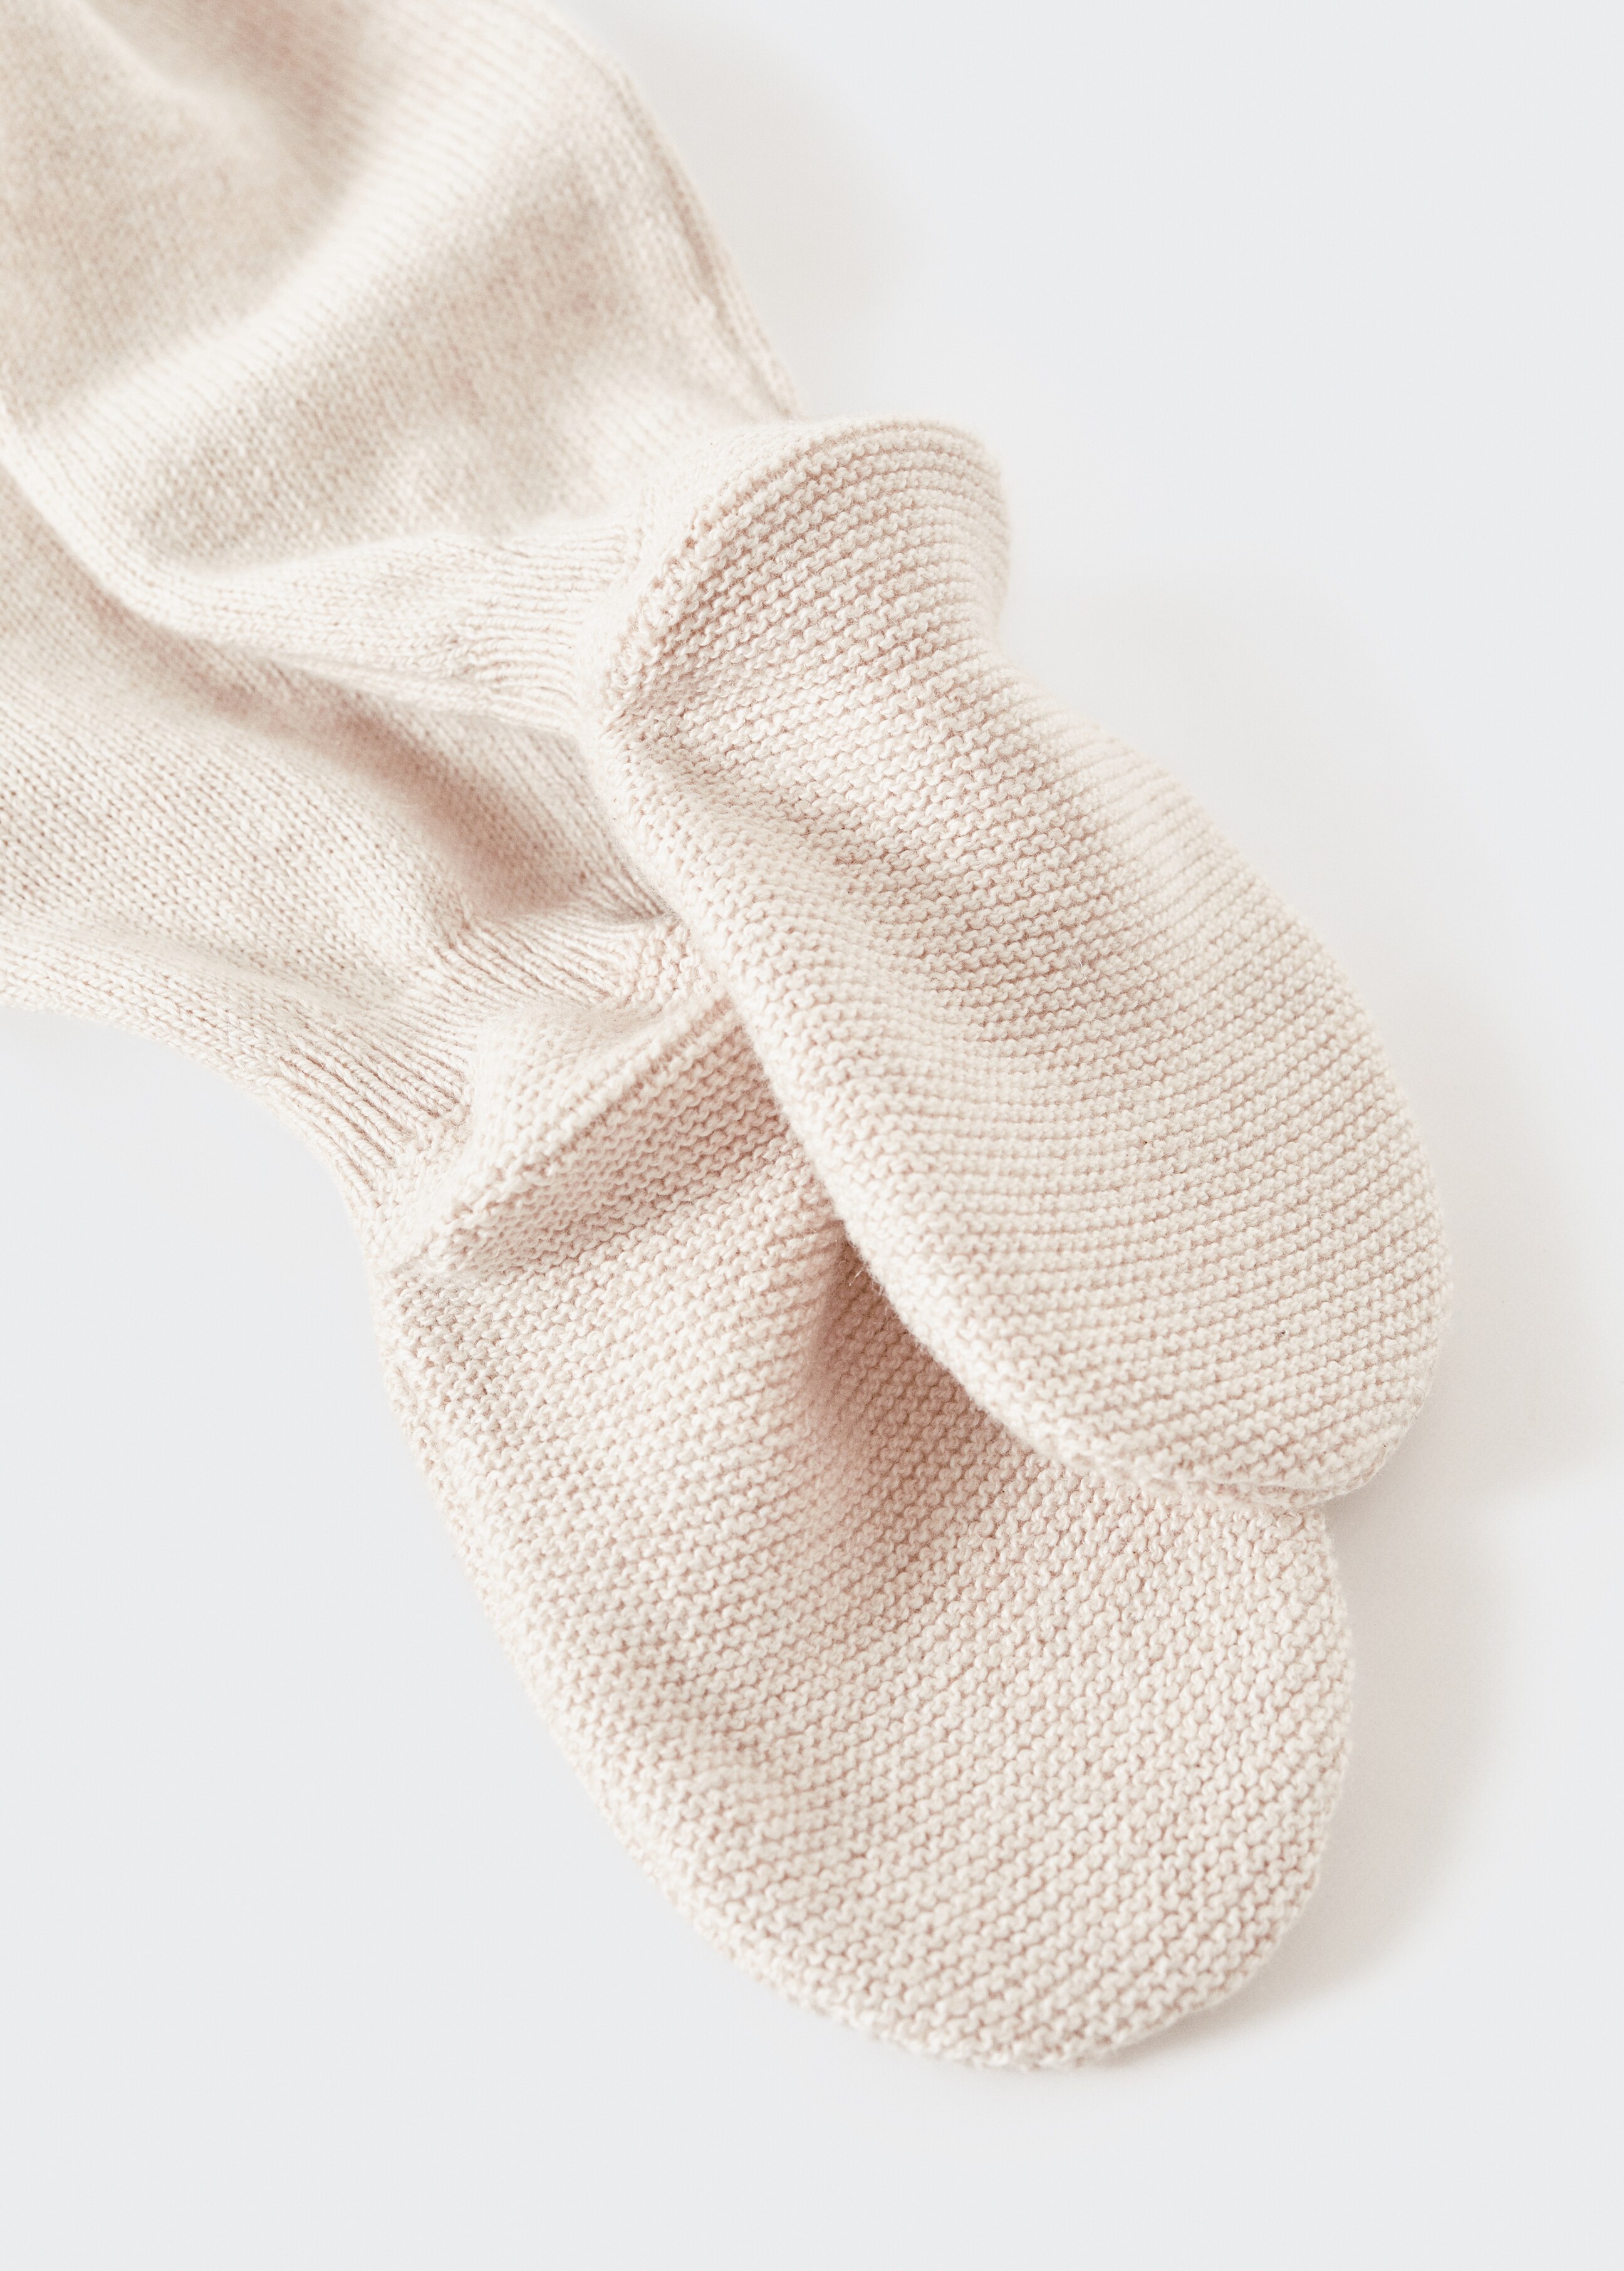 Knit footed pants - Details of the article 0